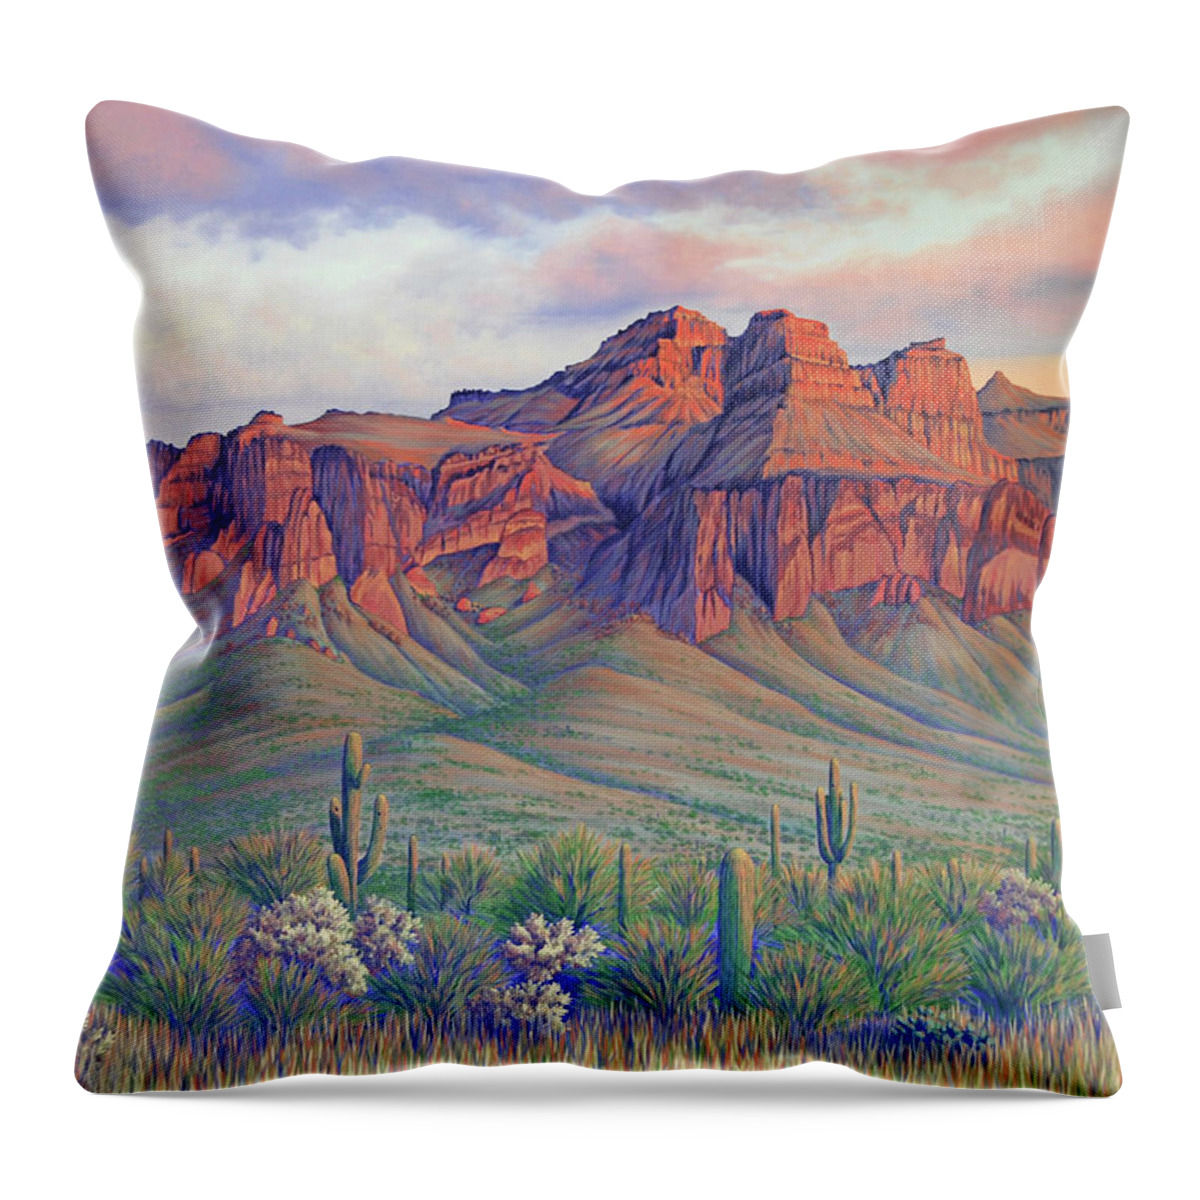 Landscape Throw Pillow featuring the painting Superstition Sonata by Cheryl Fecht